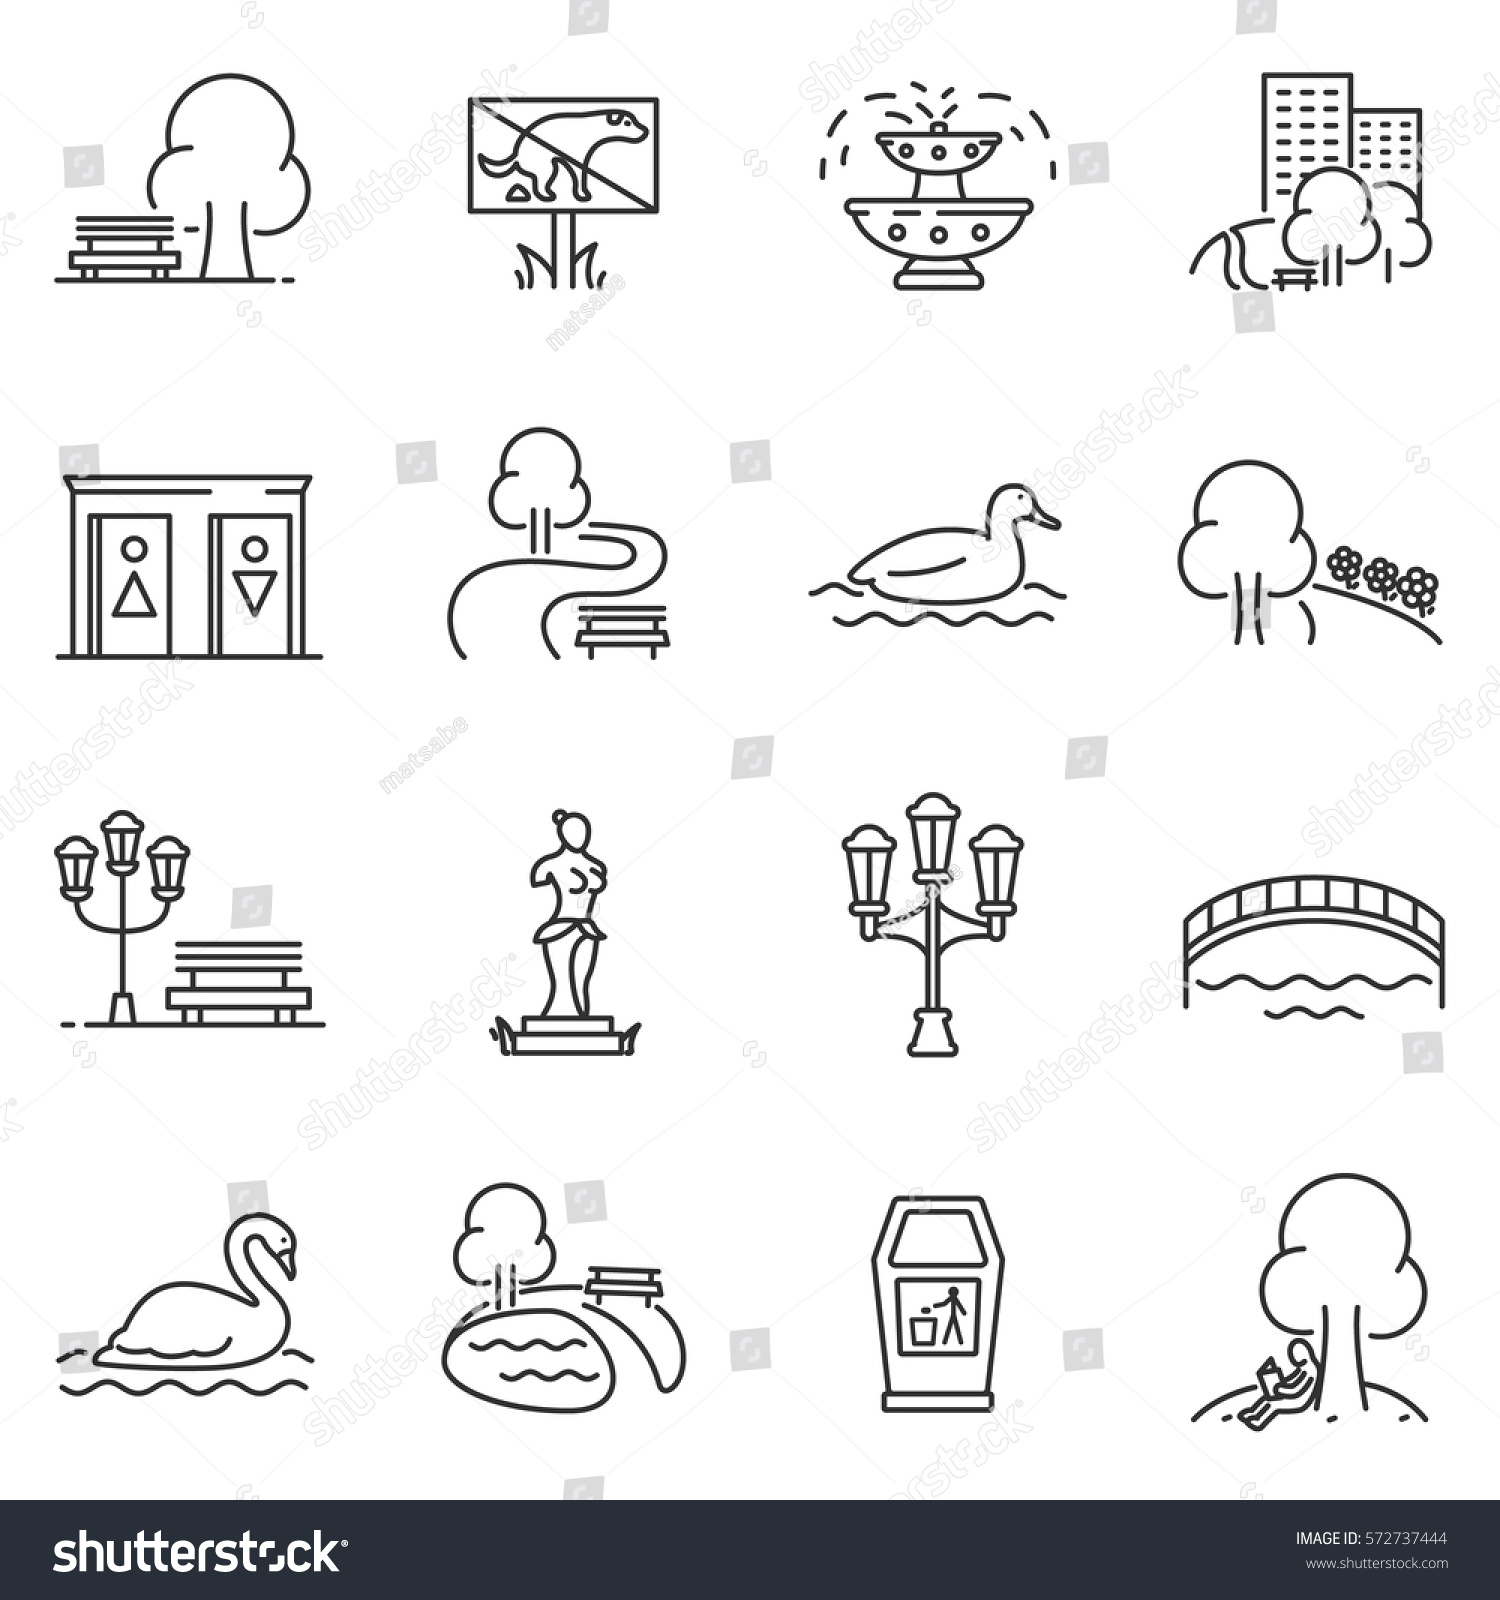 City park icons set. The open plot of land for recreation, thin line design. isolated symbols collection #572737444